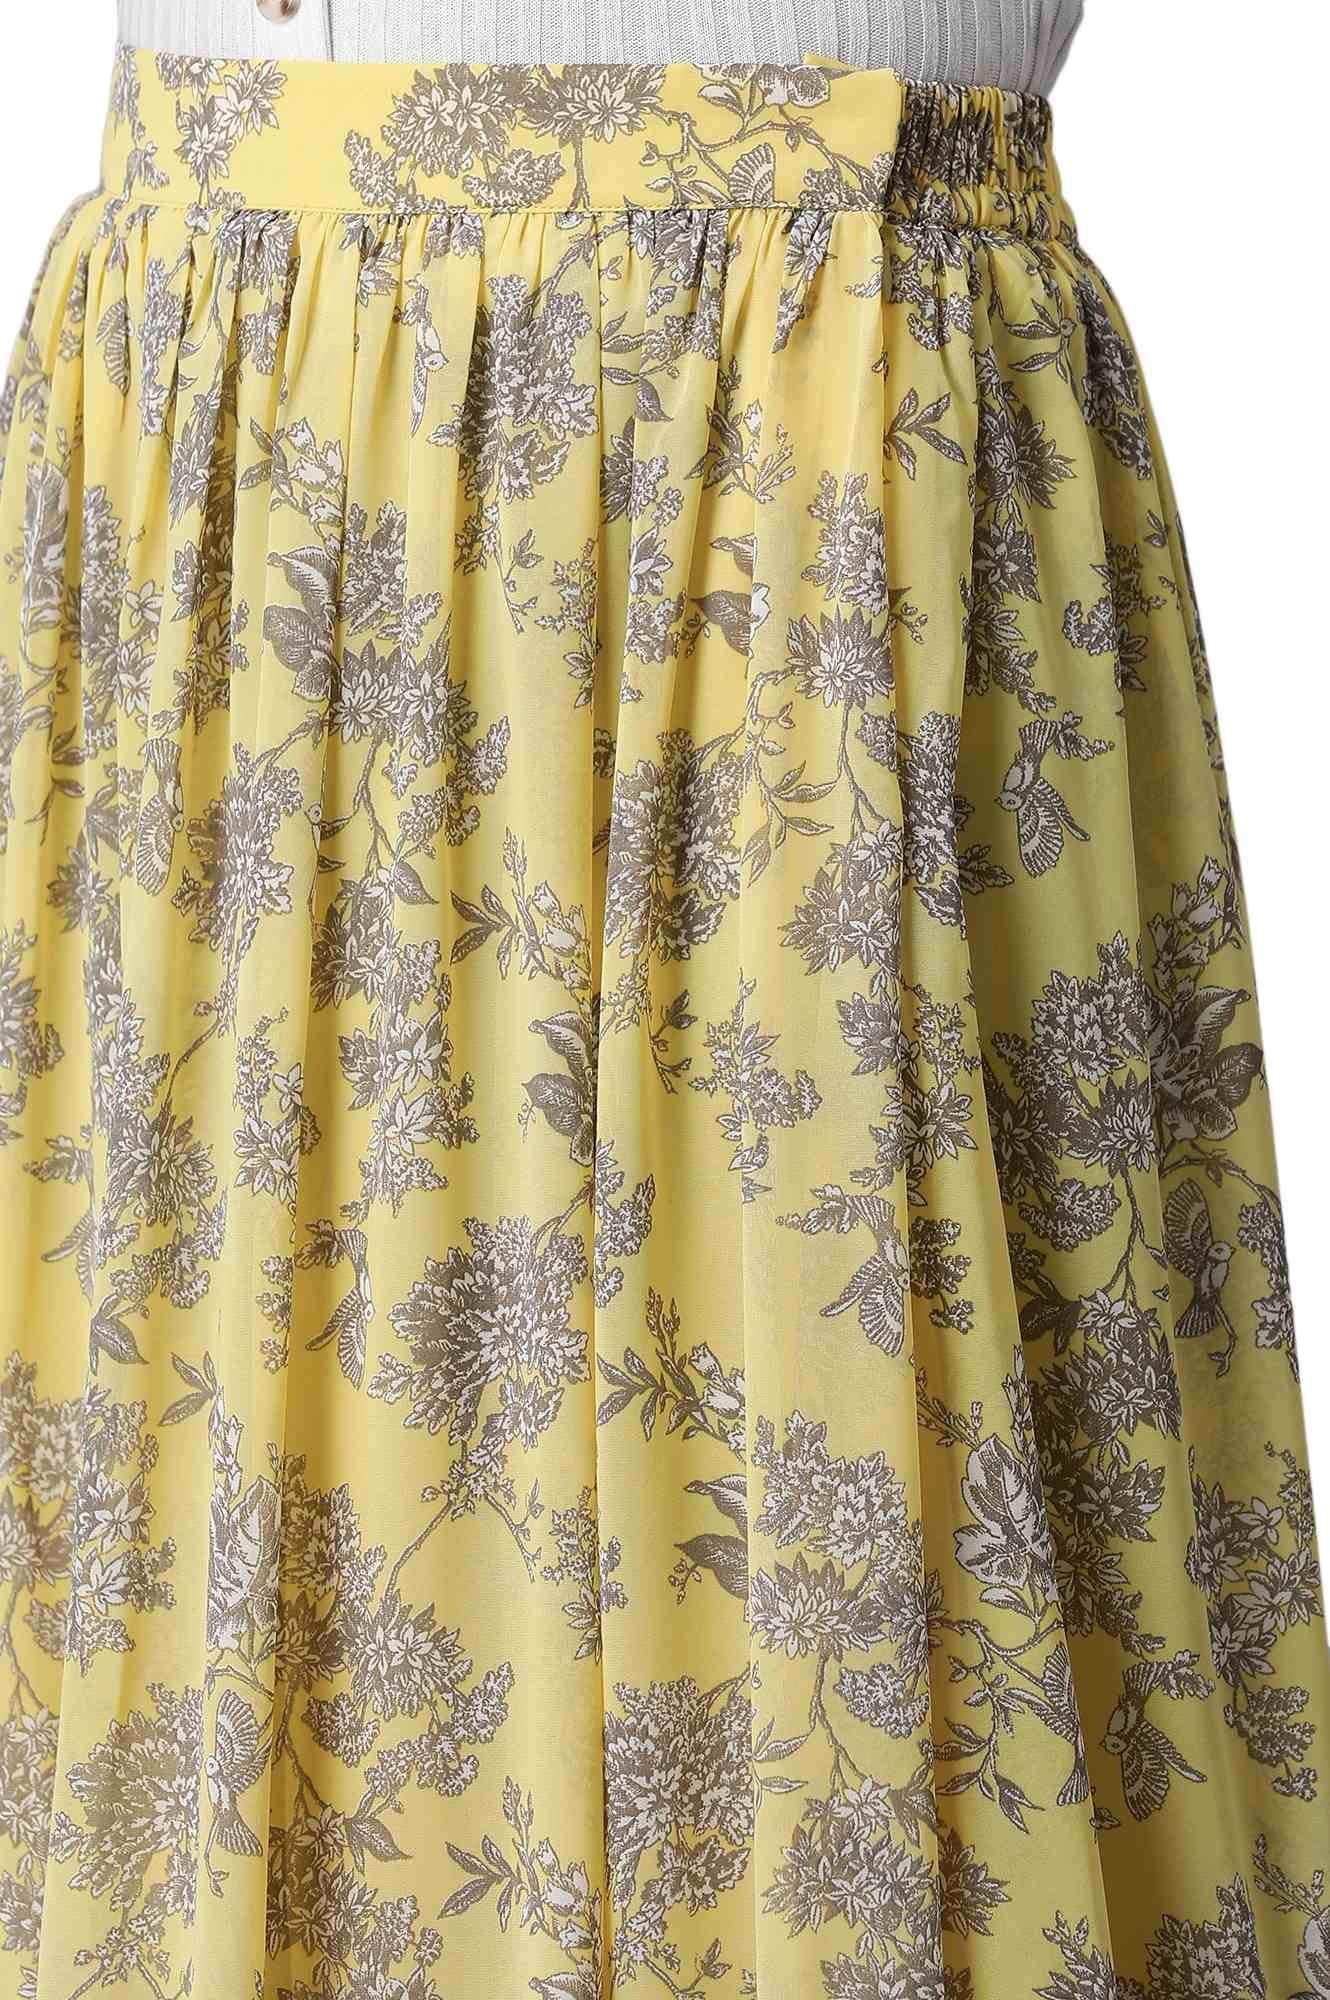 W for Woman Yellow Georgette Tiered Skirt_21FEW50302-114057_L